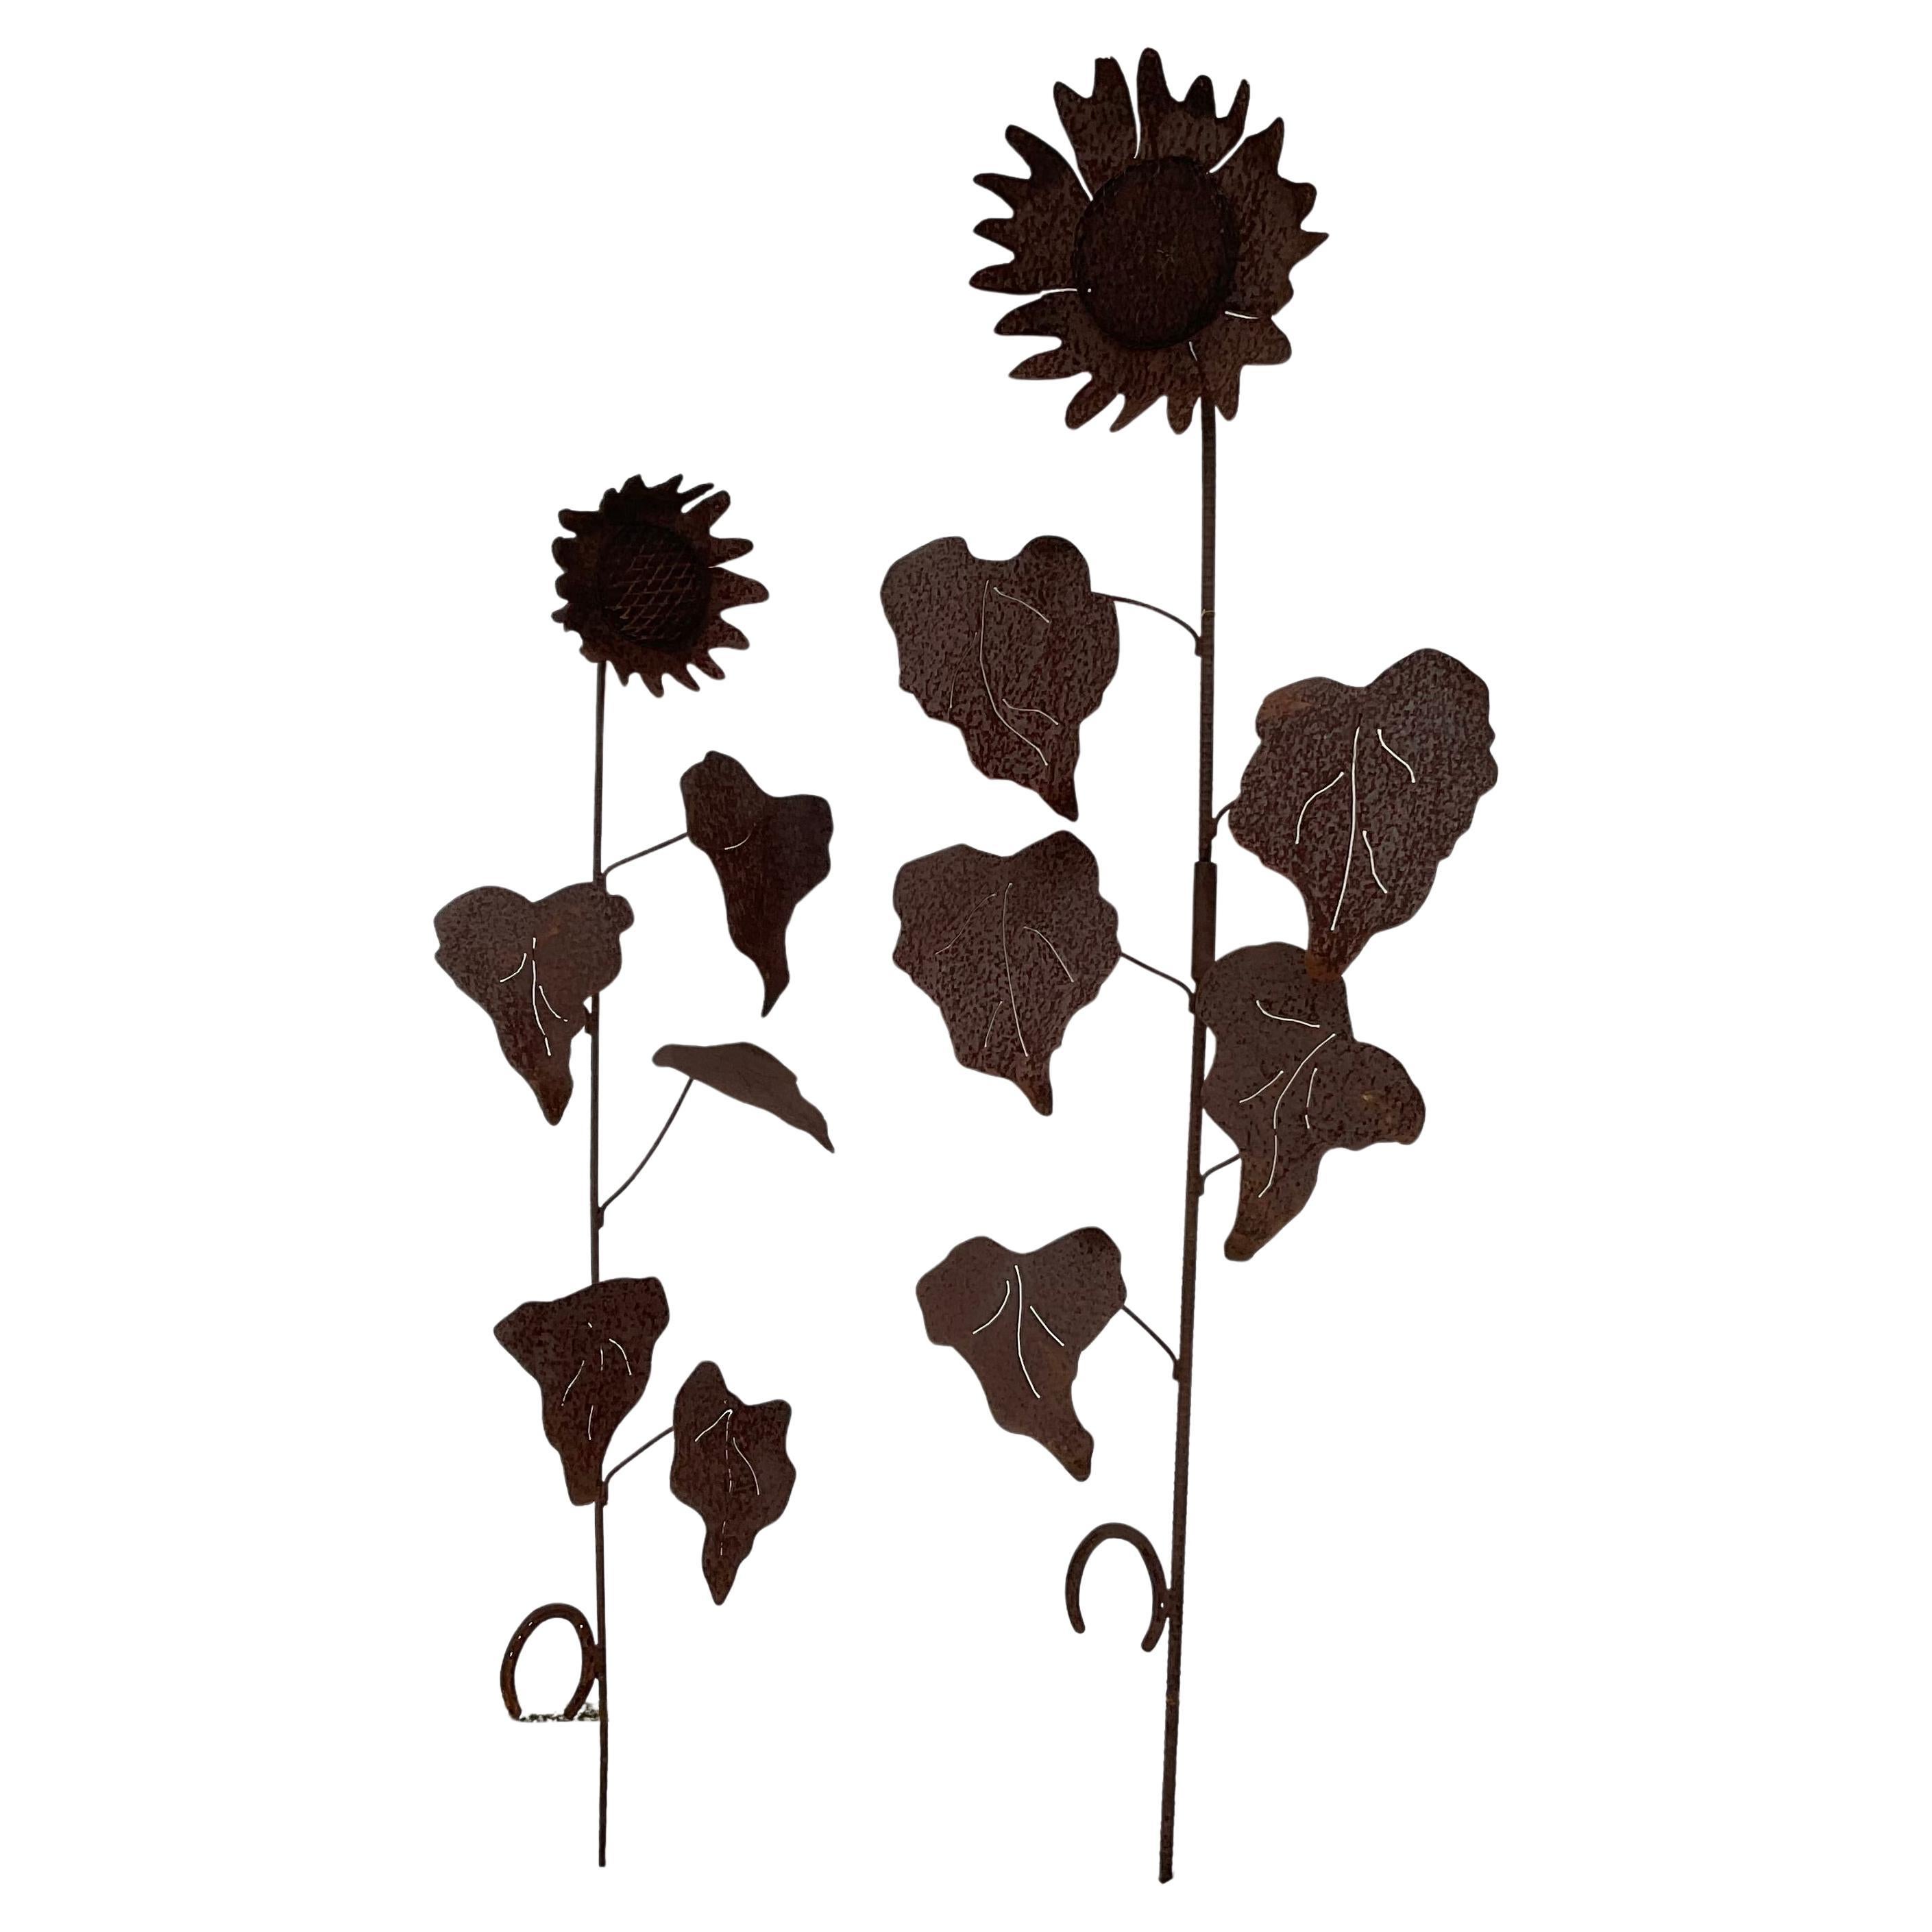 Pair of vintage rusted metal sunflower garden stakes. Wonderful rust patina. Tall stakes with large leaves topped with sunny sunflowers. Pleasing addition to any garden.

Dimensions:
1) 74